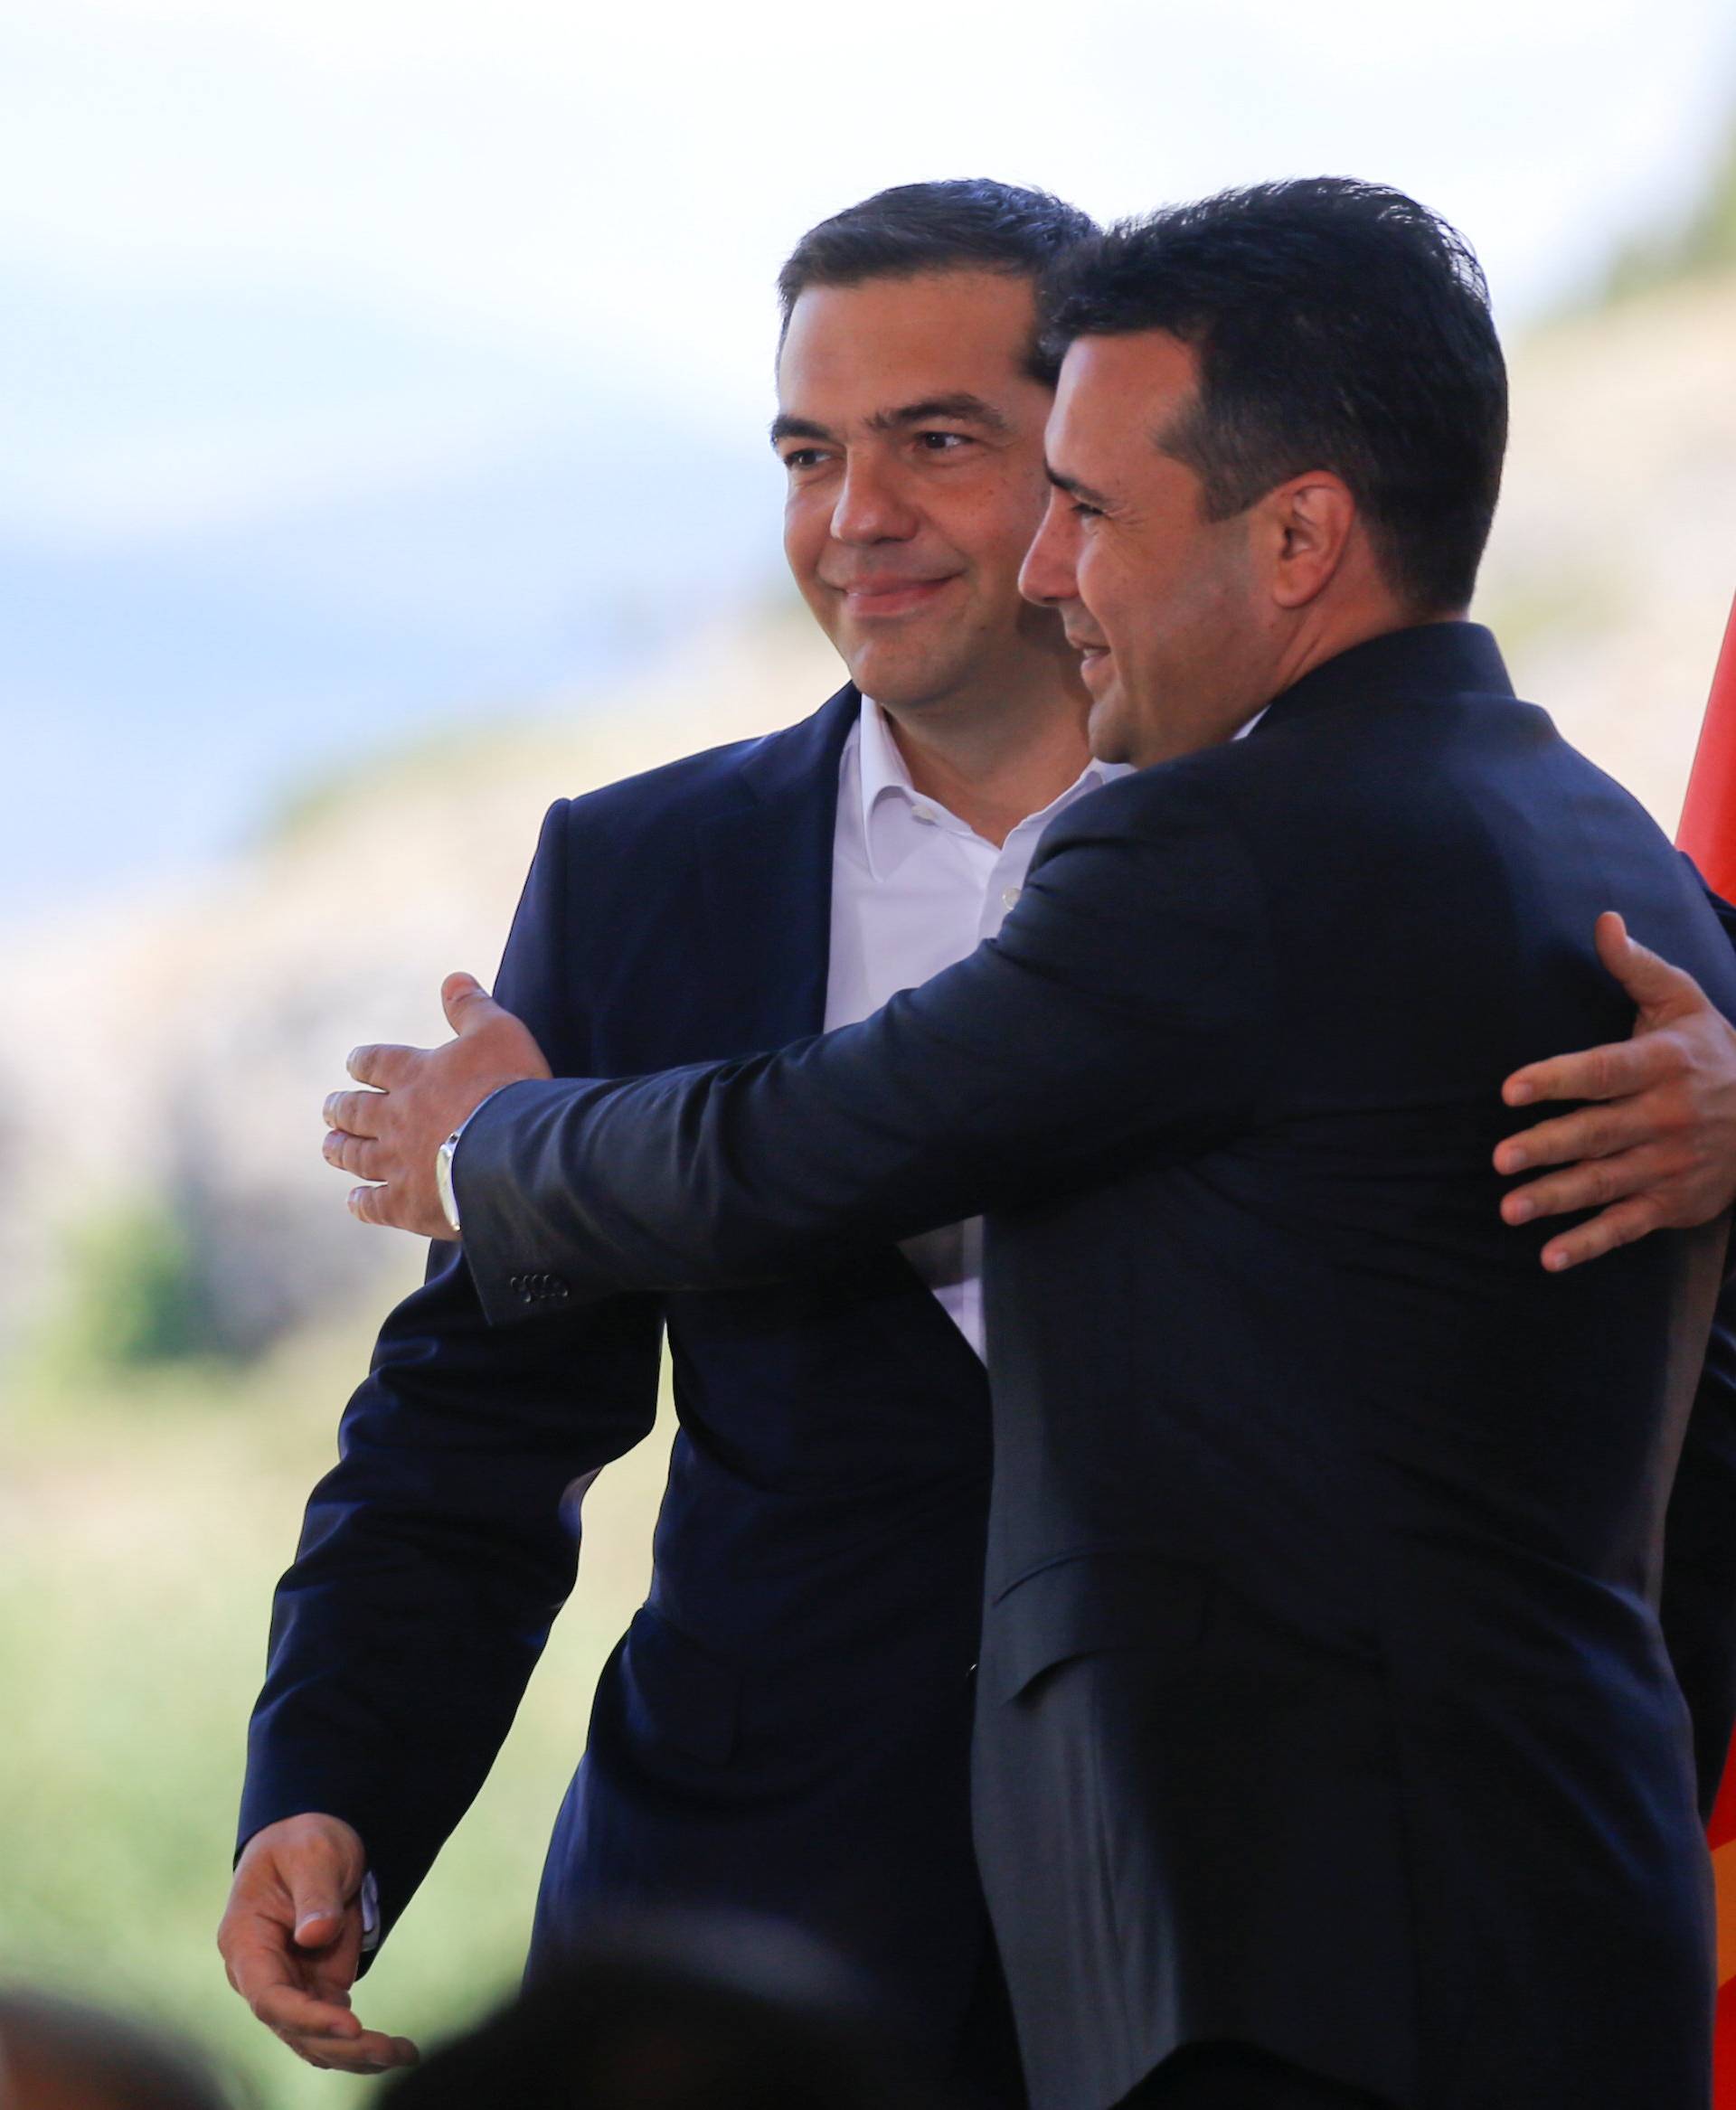 Greek Prime Minister Alexis Tsipras and Macedonian Prime Minister Zoran Zaev hug before the signing of an accord to settle a long dispute over the former Yugoslav republic's name in the village of Psarades